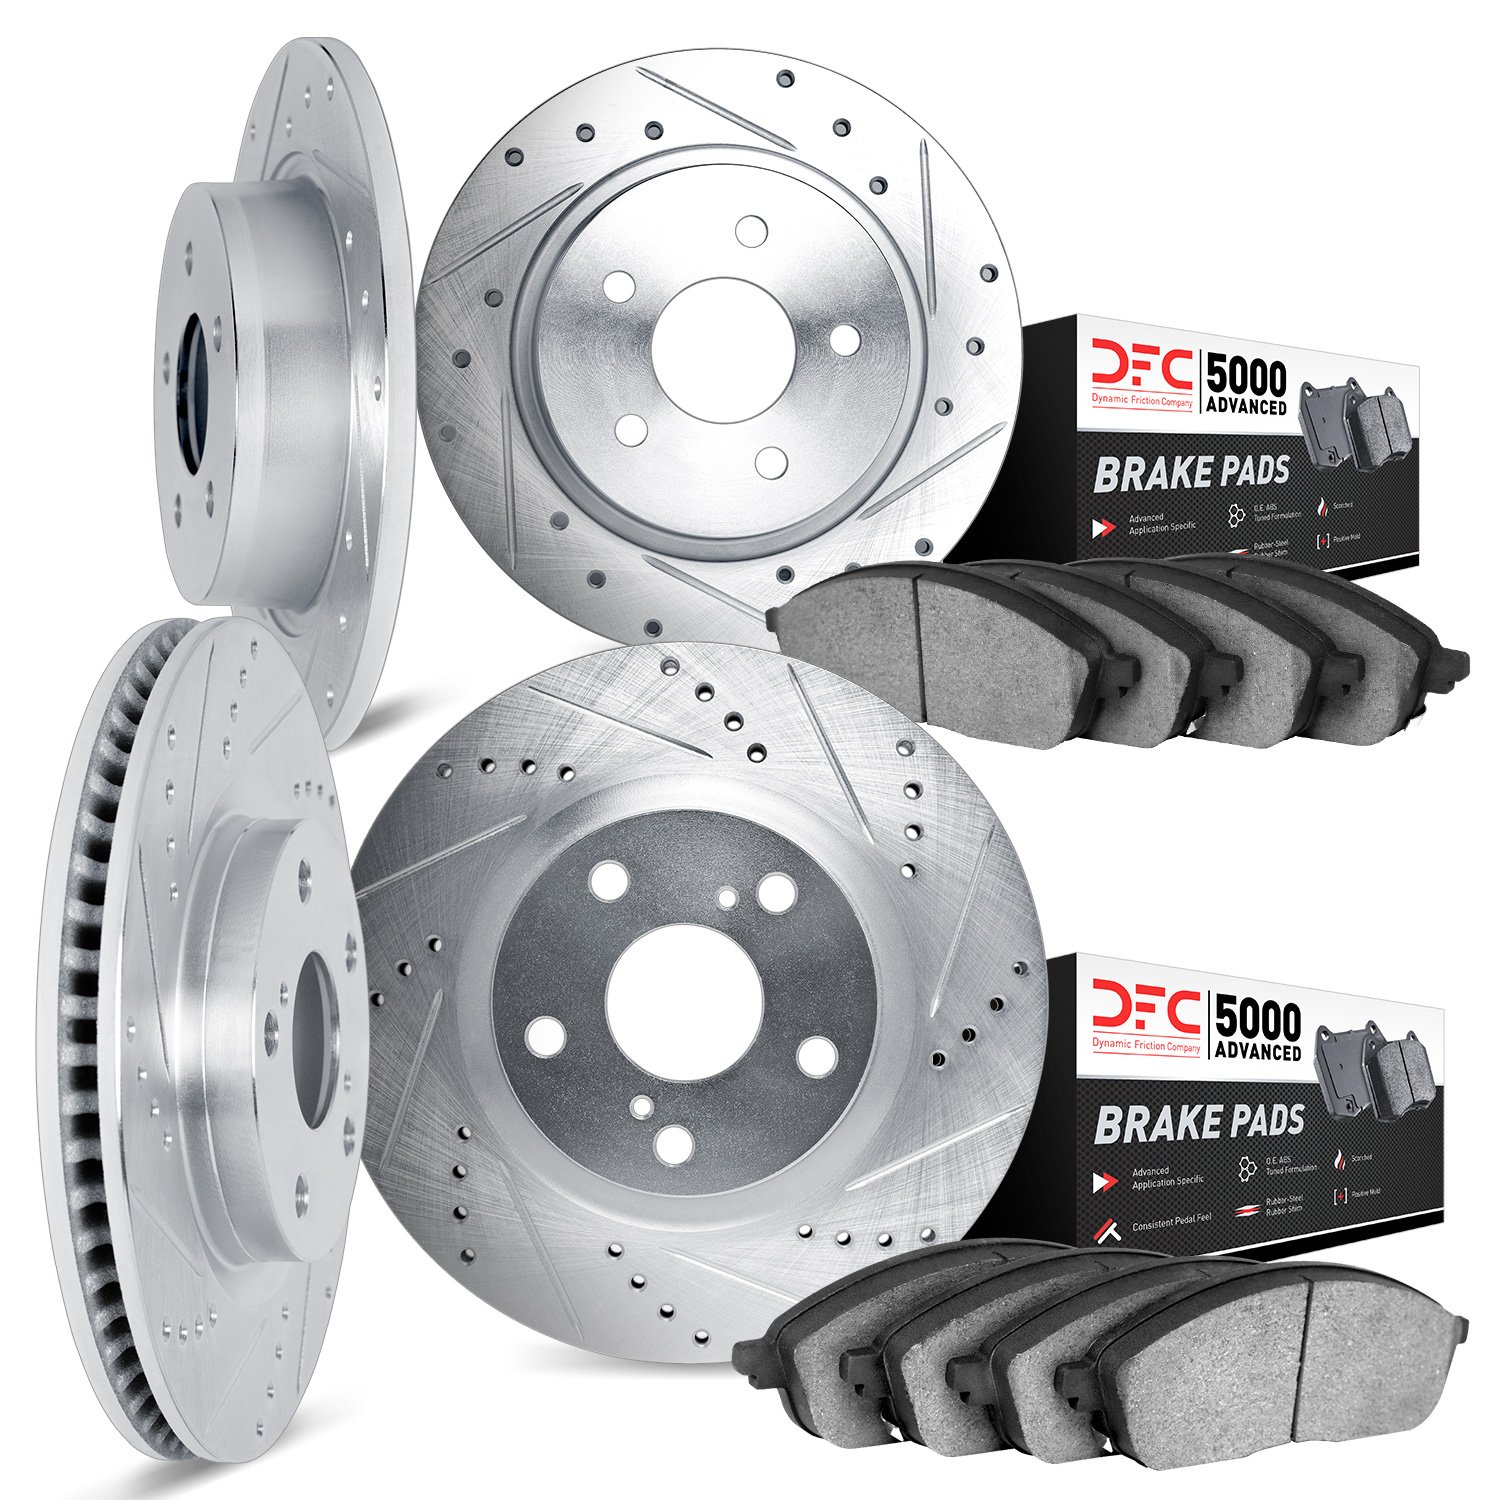 7504-76160 Drilled/Slotted Brake Rotors w/5000 Advanced Brake Pads Kit [Silver], Fits Select Lexus/Toyota/Scion, Position: Front